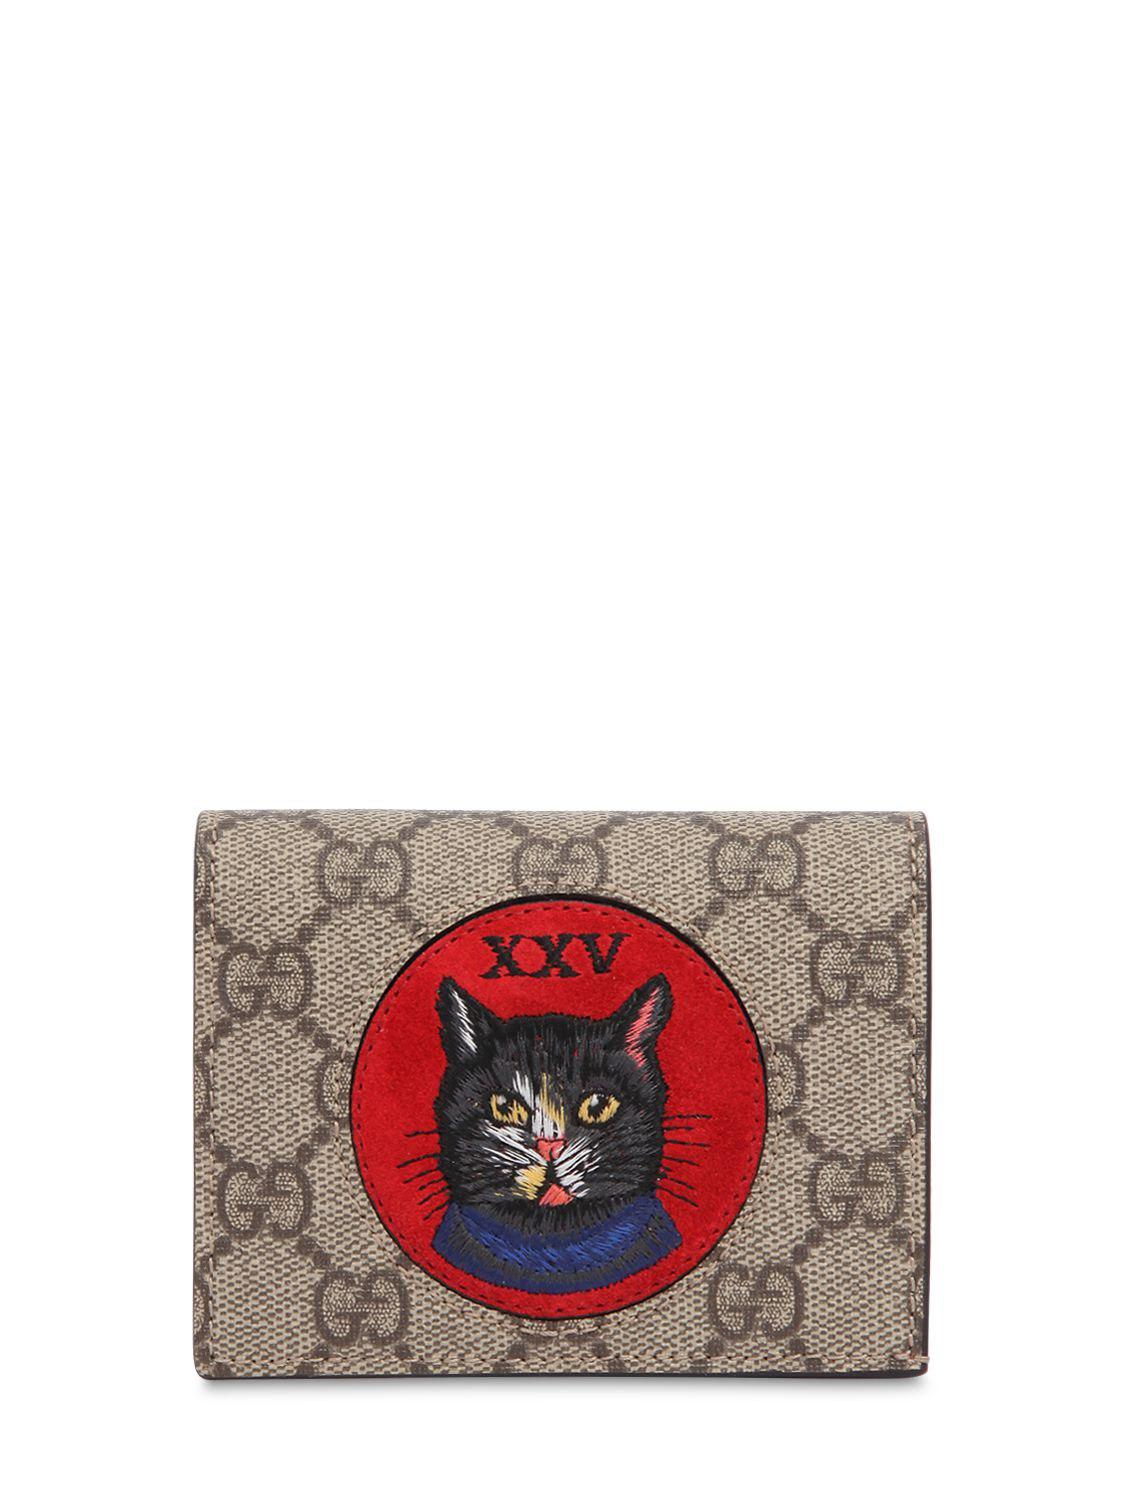 Gucci Leather Oblo' Cat Card Holder in Taupe/Red (Red) | Lyst